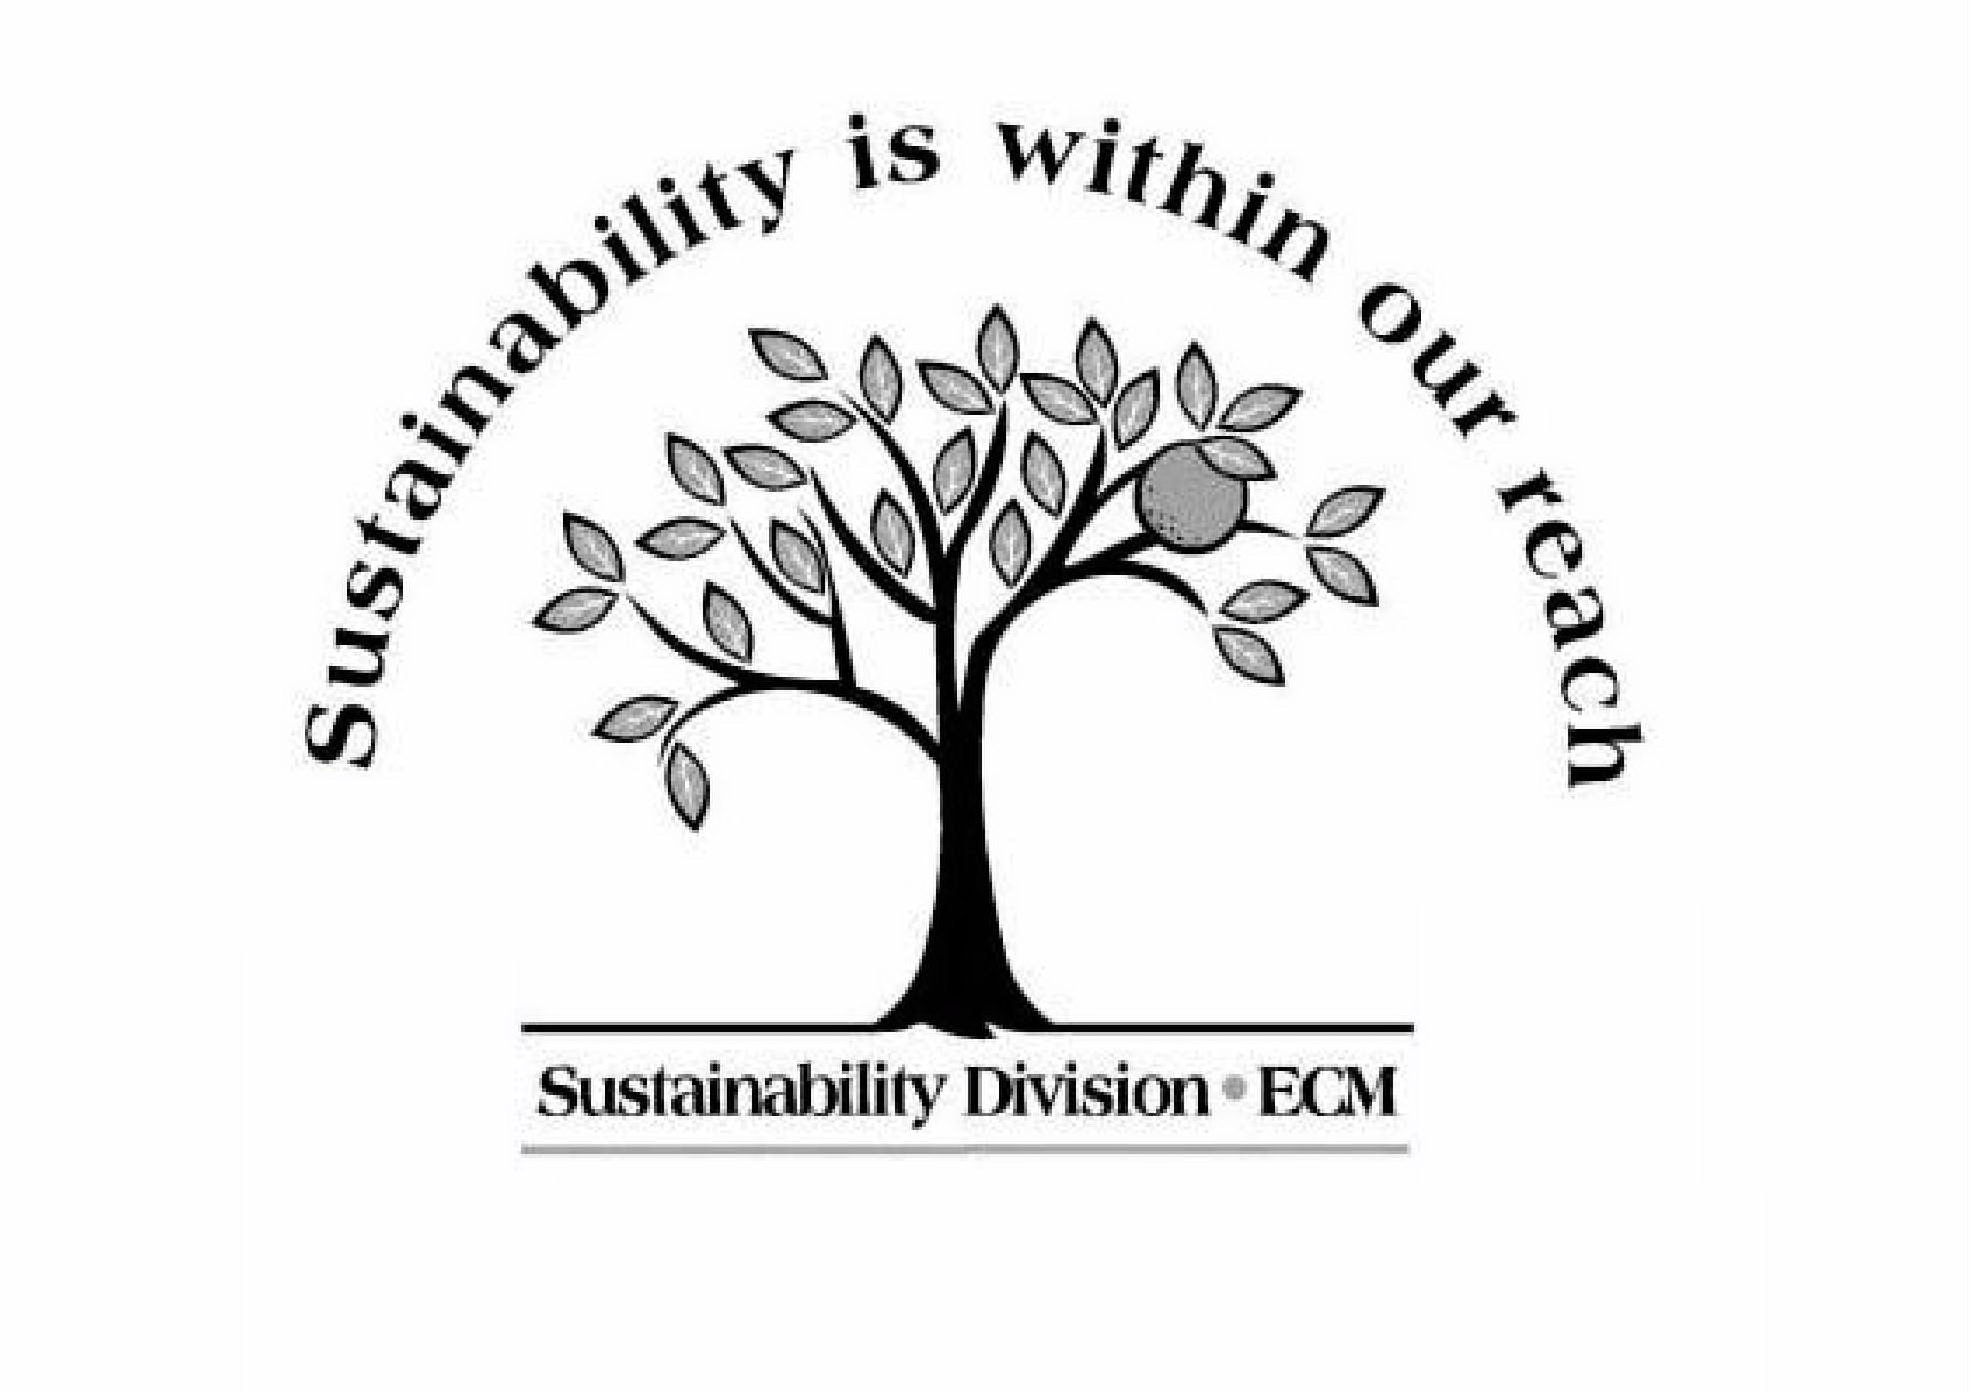  SUSTAINABILITY IS WITHIN OUR REACH SUSTAINABILITY DIVISION Â· ECM GREENUNIVERSITY.SYR.EDU